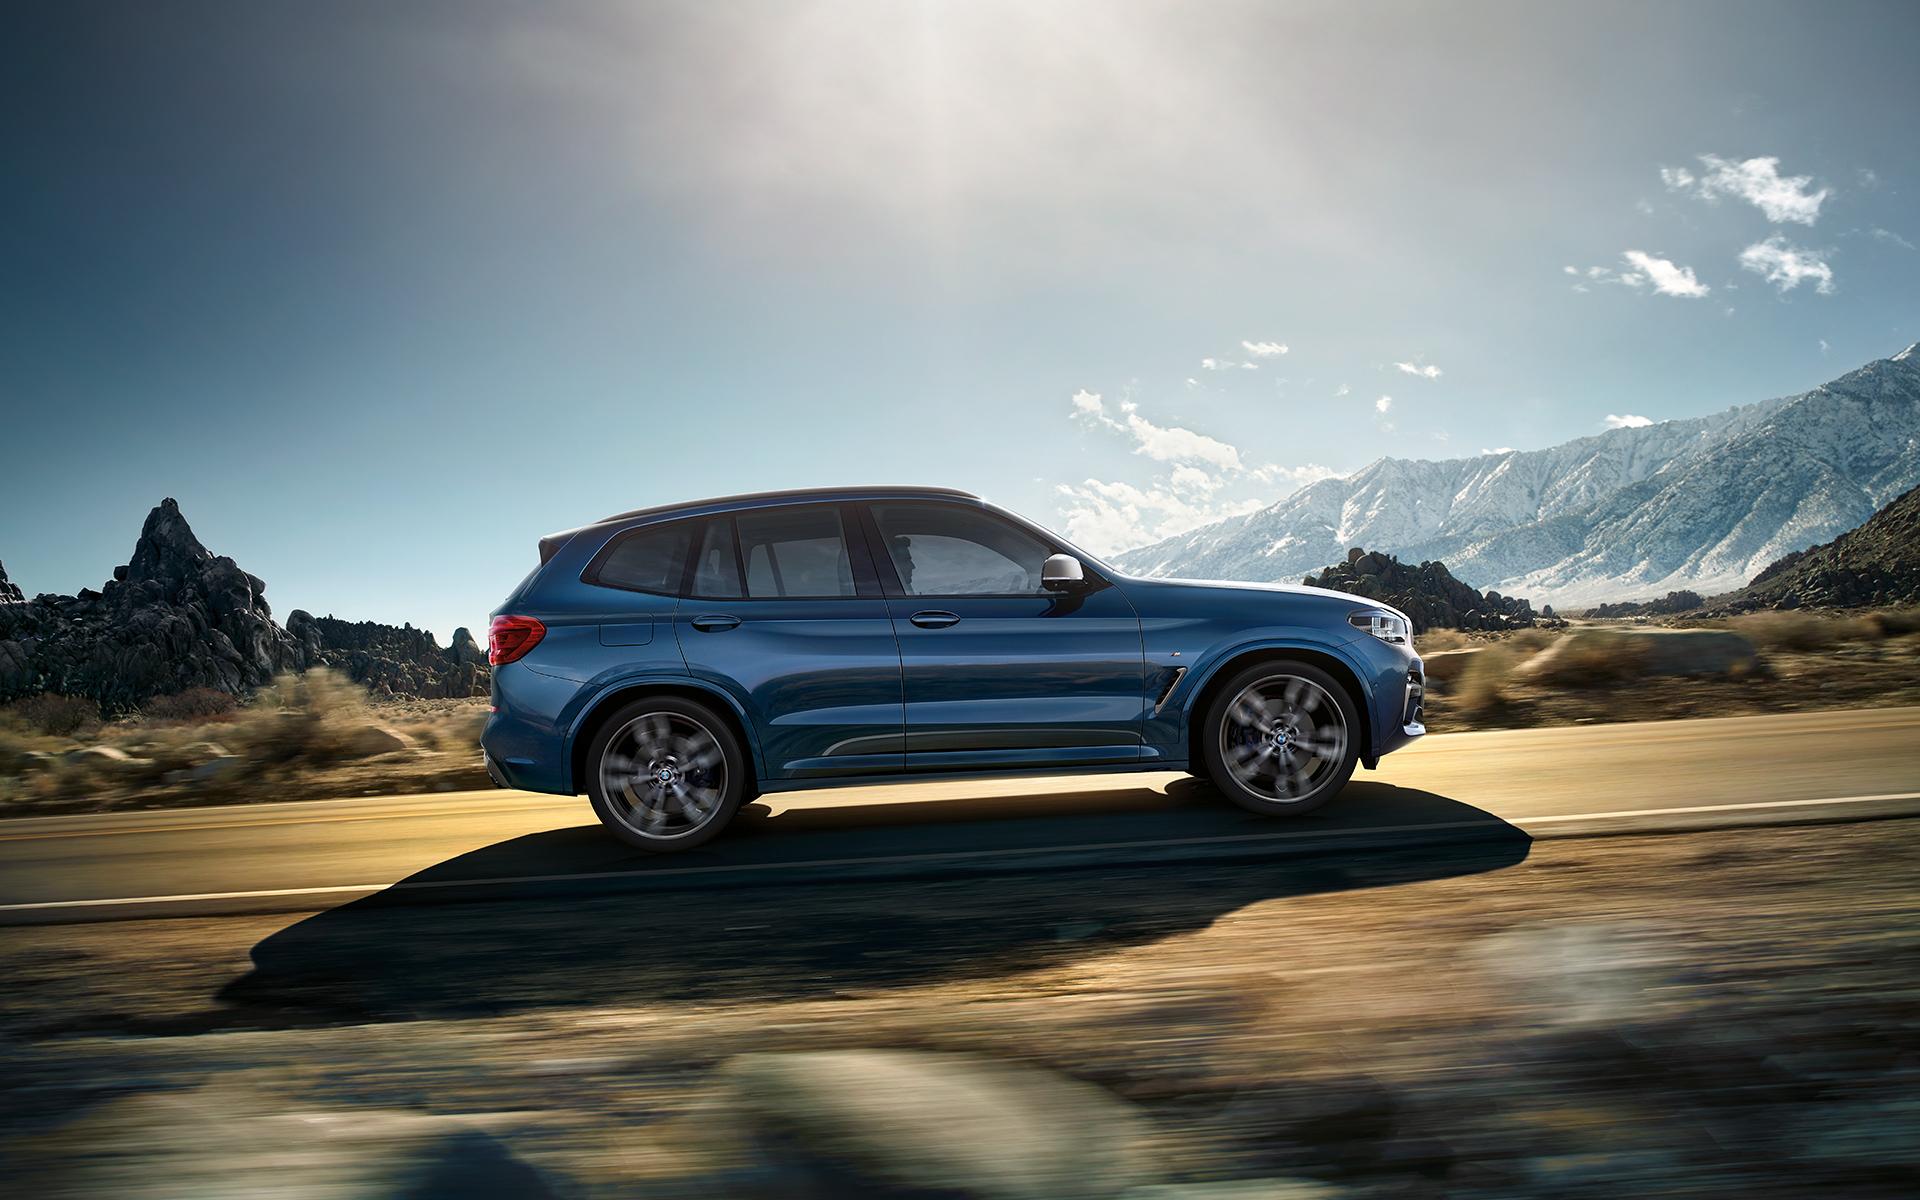 Download wallpaper of the new BMW X3